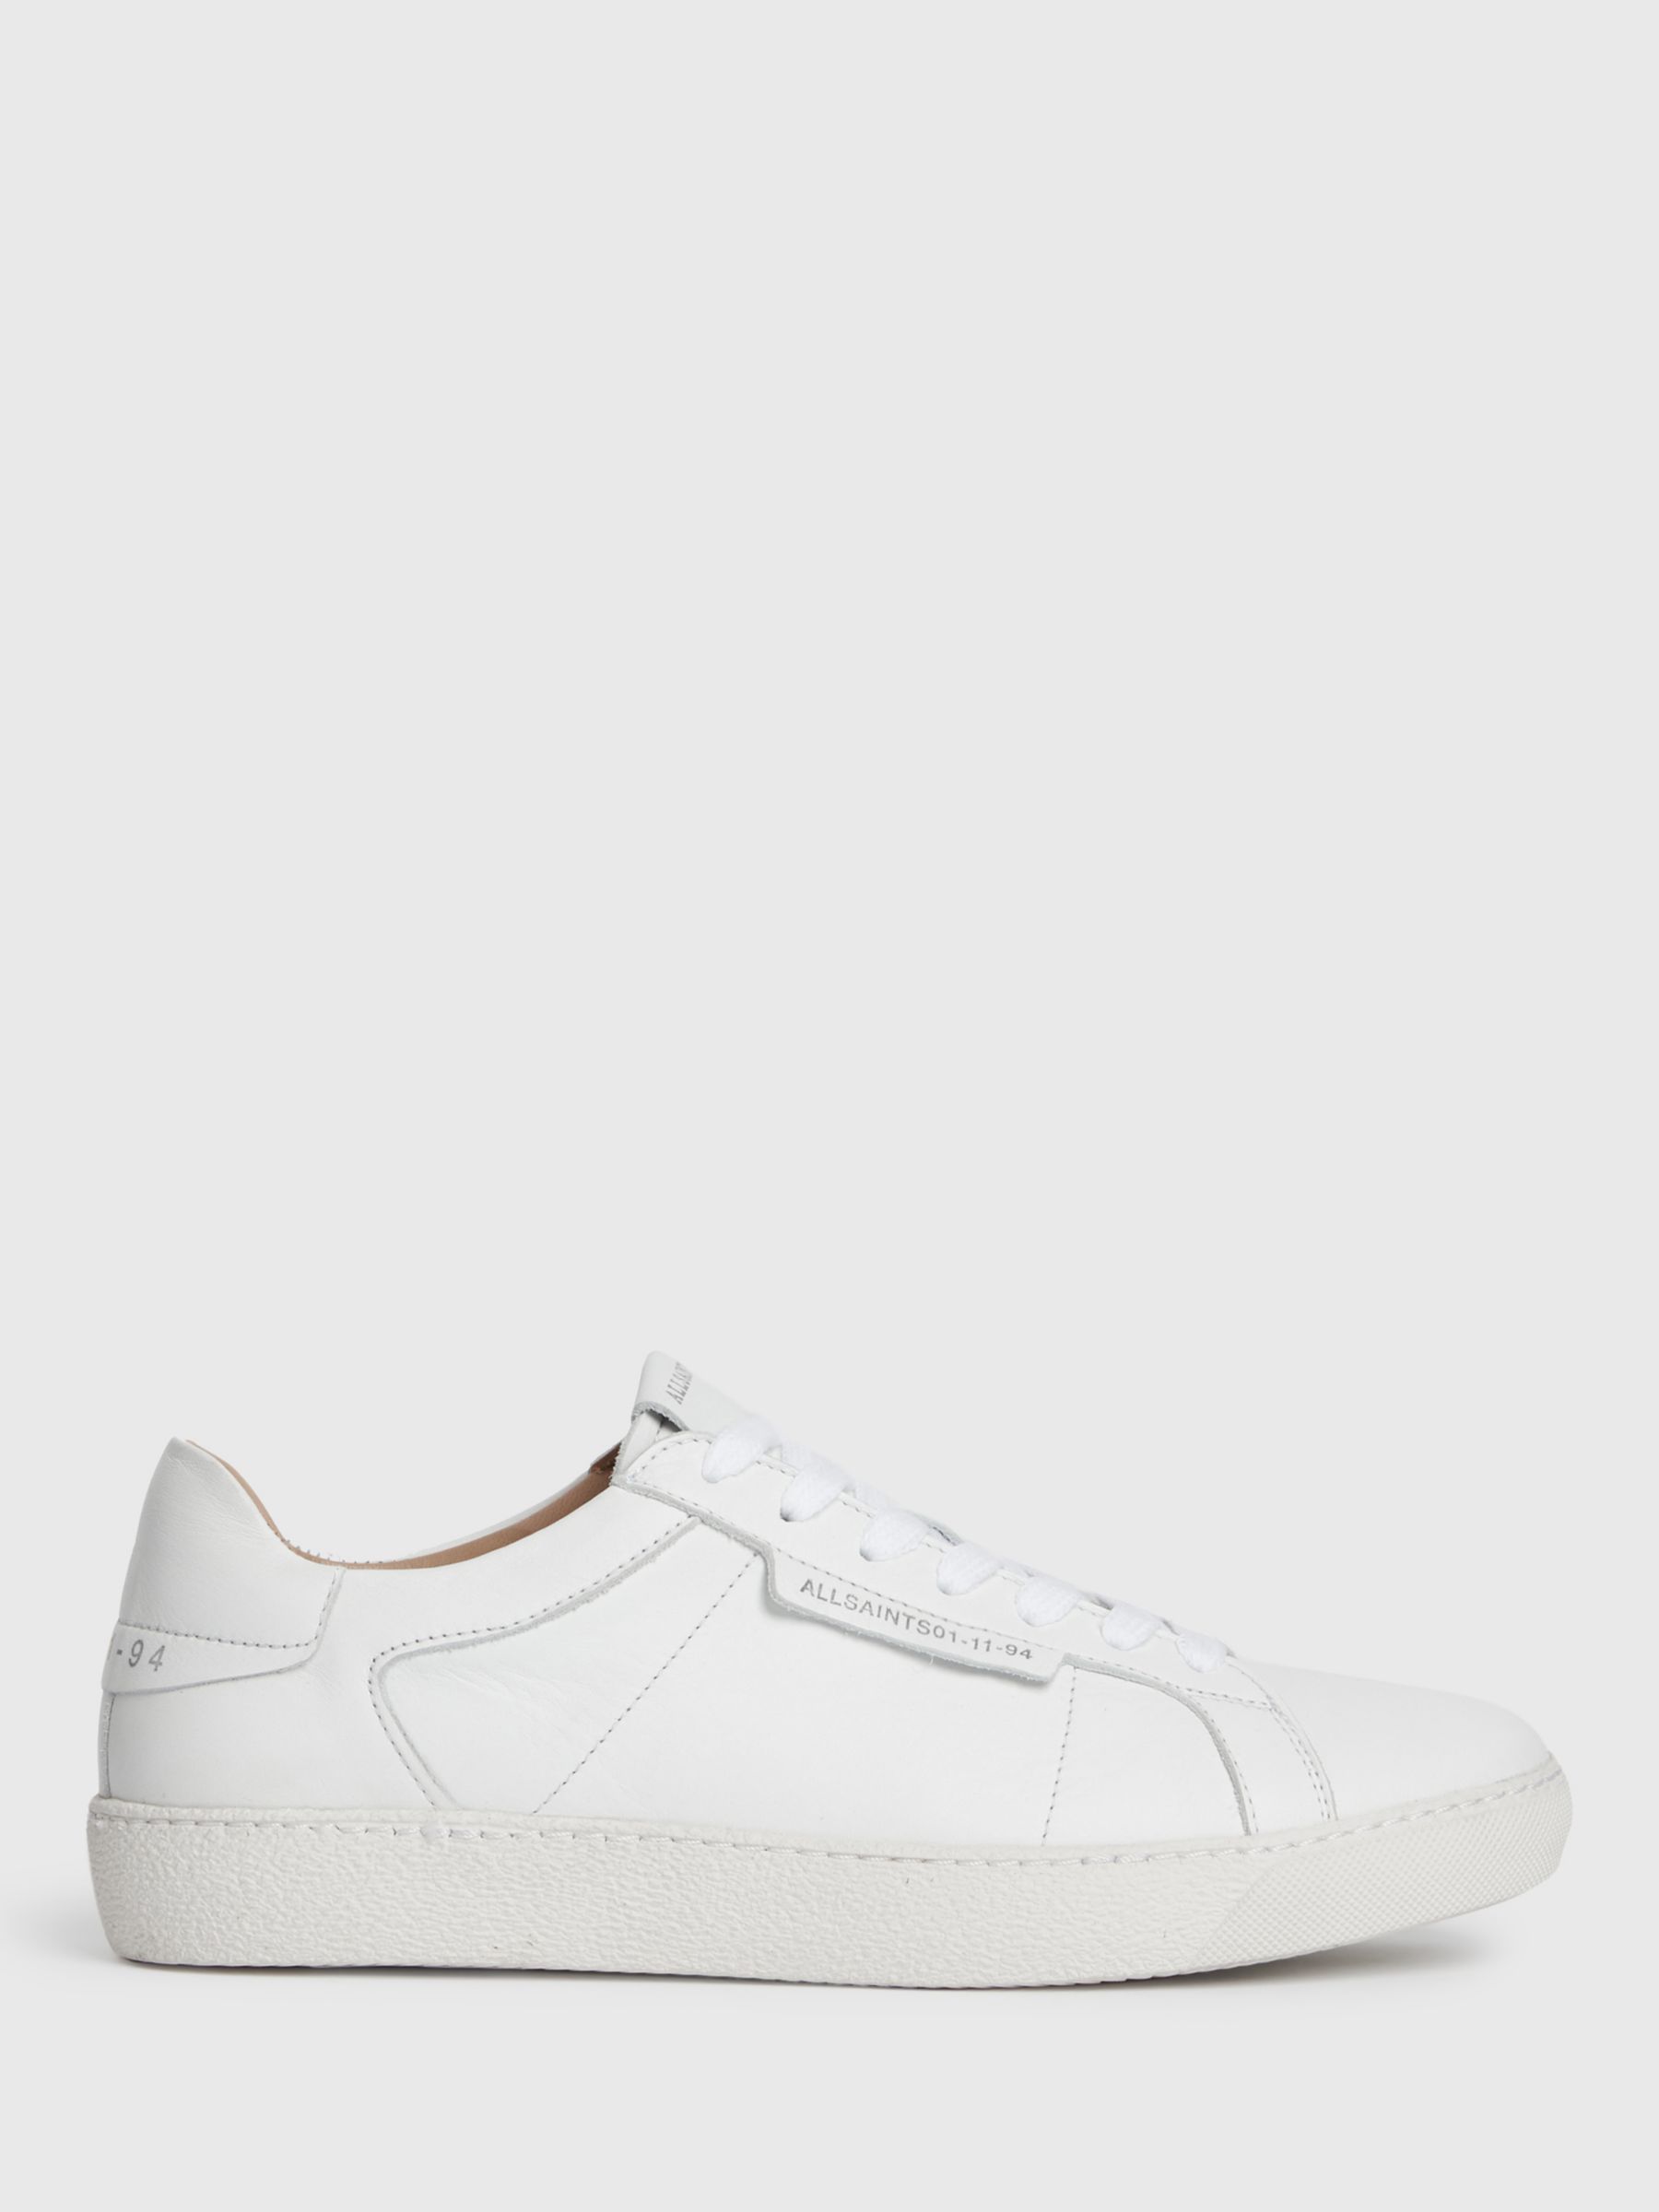 AllSaints Sheer Low Leather Trainers, White, White, 6